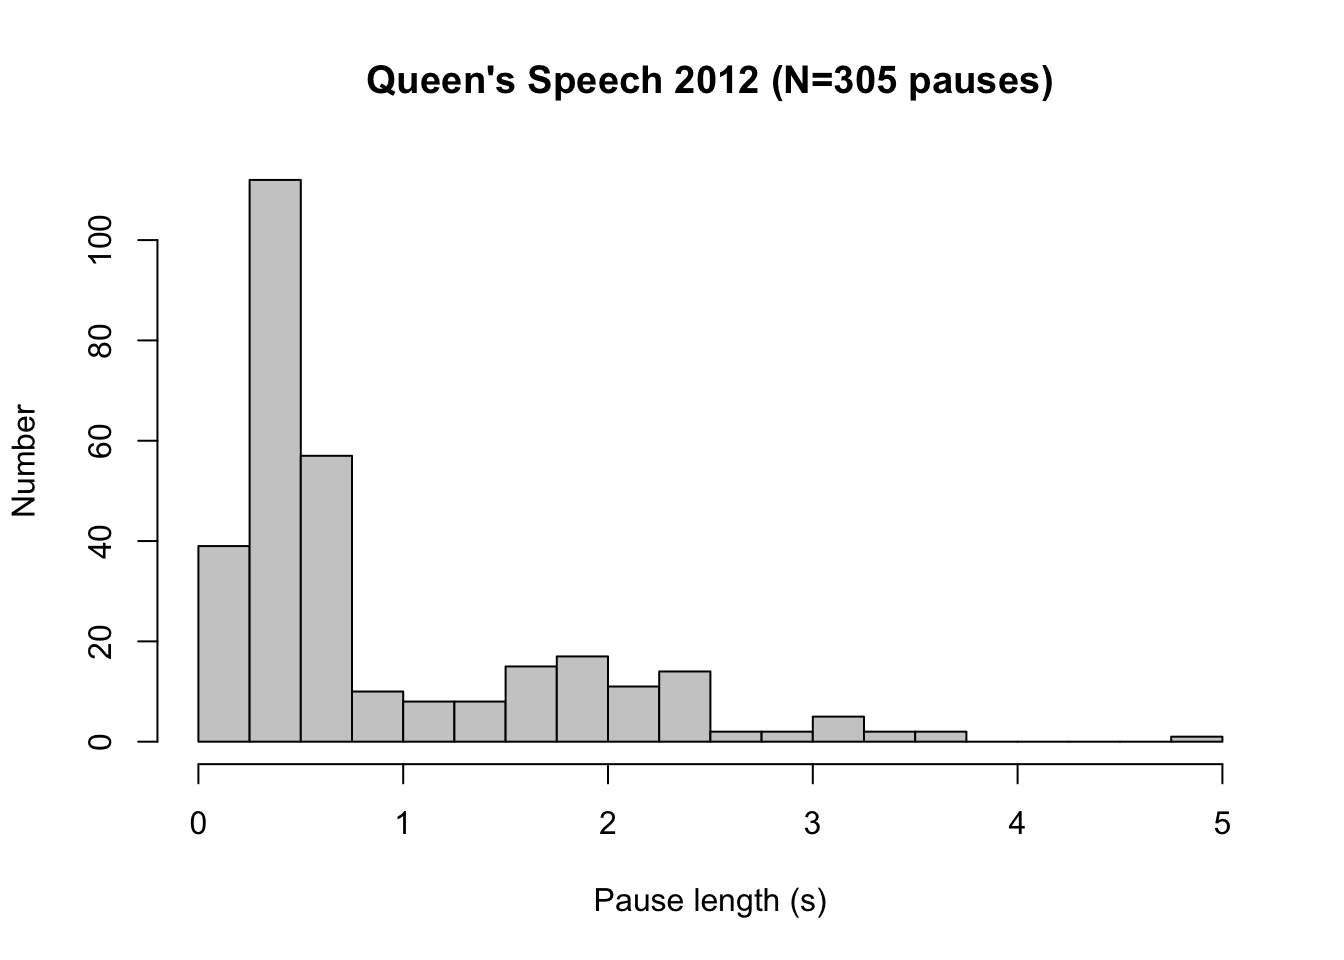 Histogram for the lengths of pauses (in seconds) in the Queen's Speech of 18 September 2012, read by Queen Beatrix (N=305).